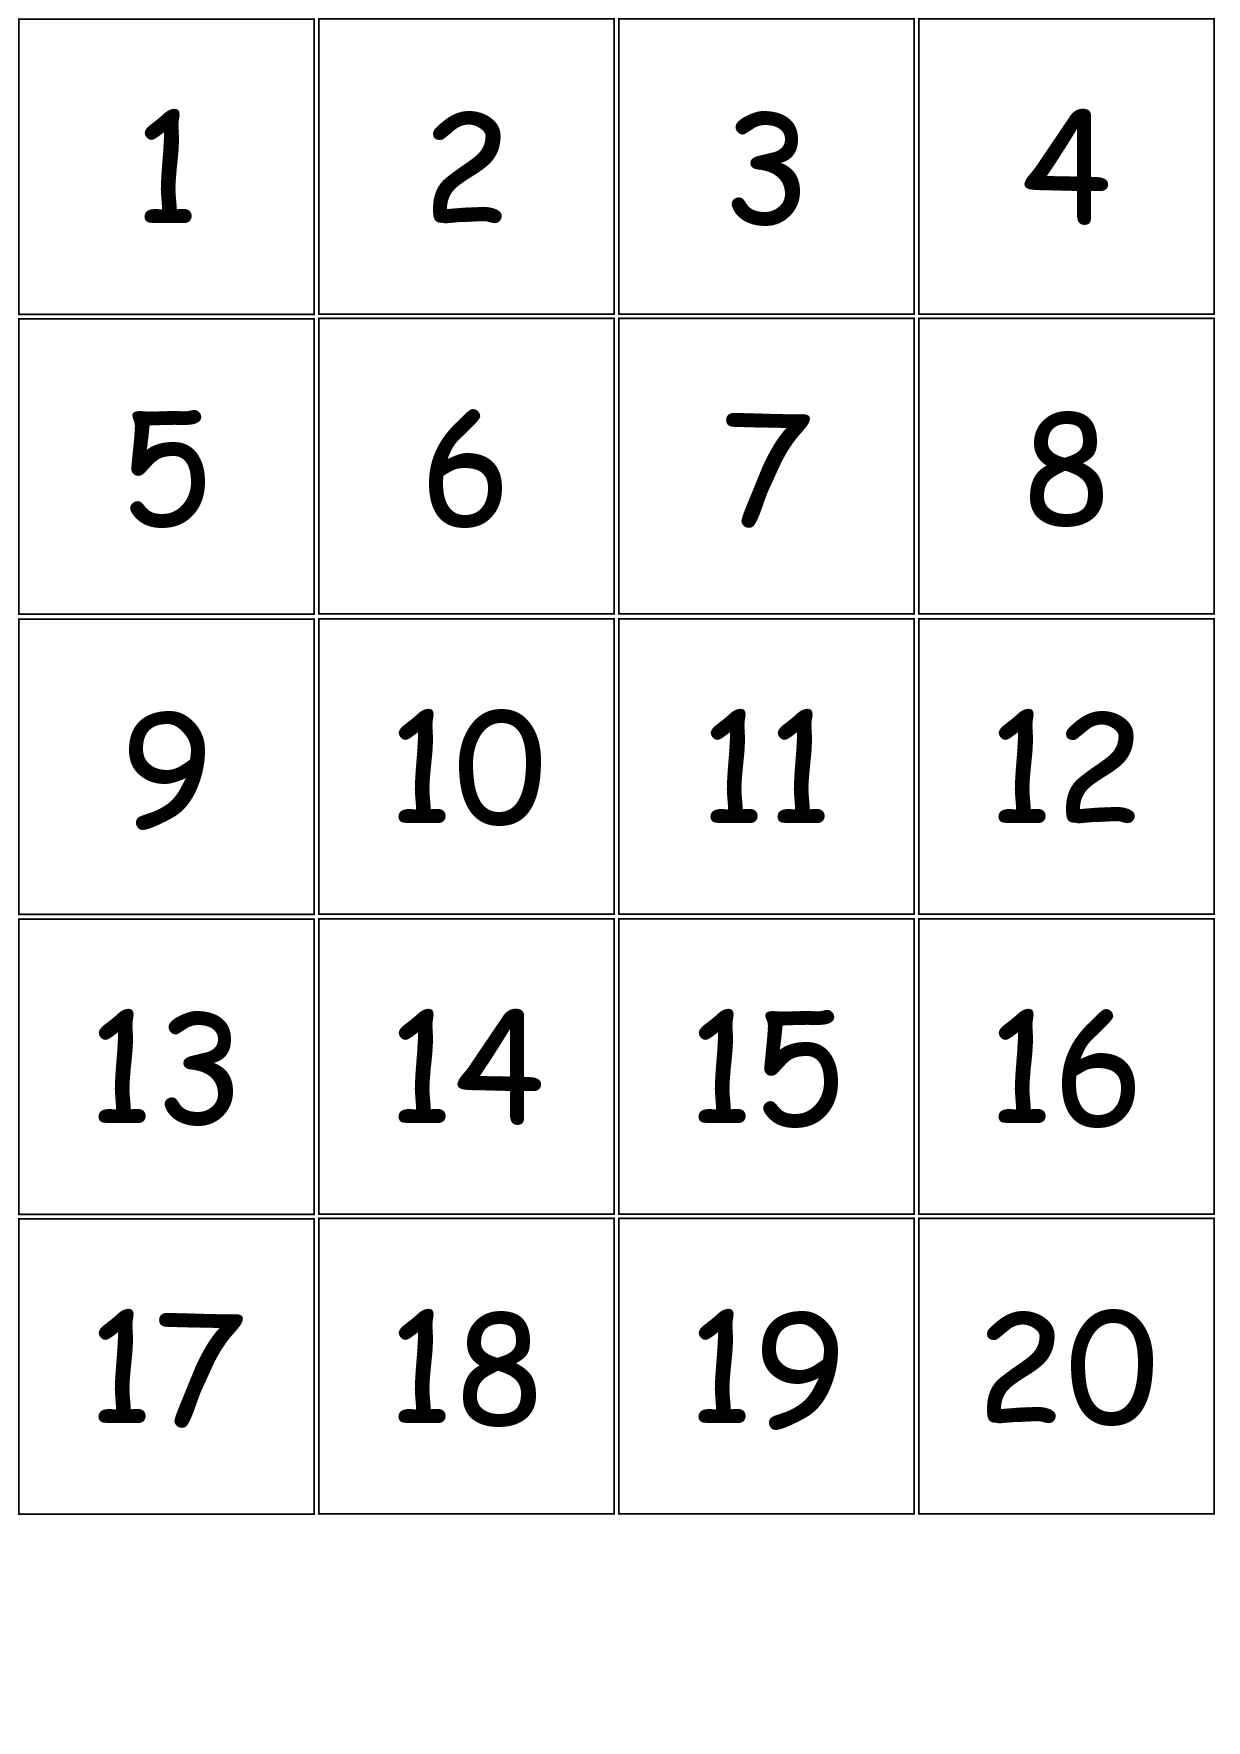 5-best-images-of-printable-number-cards-1-20-number-cards-1-20-free-printable-numbers-1-20